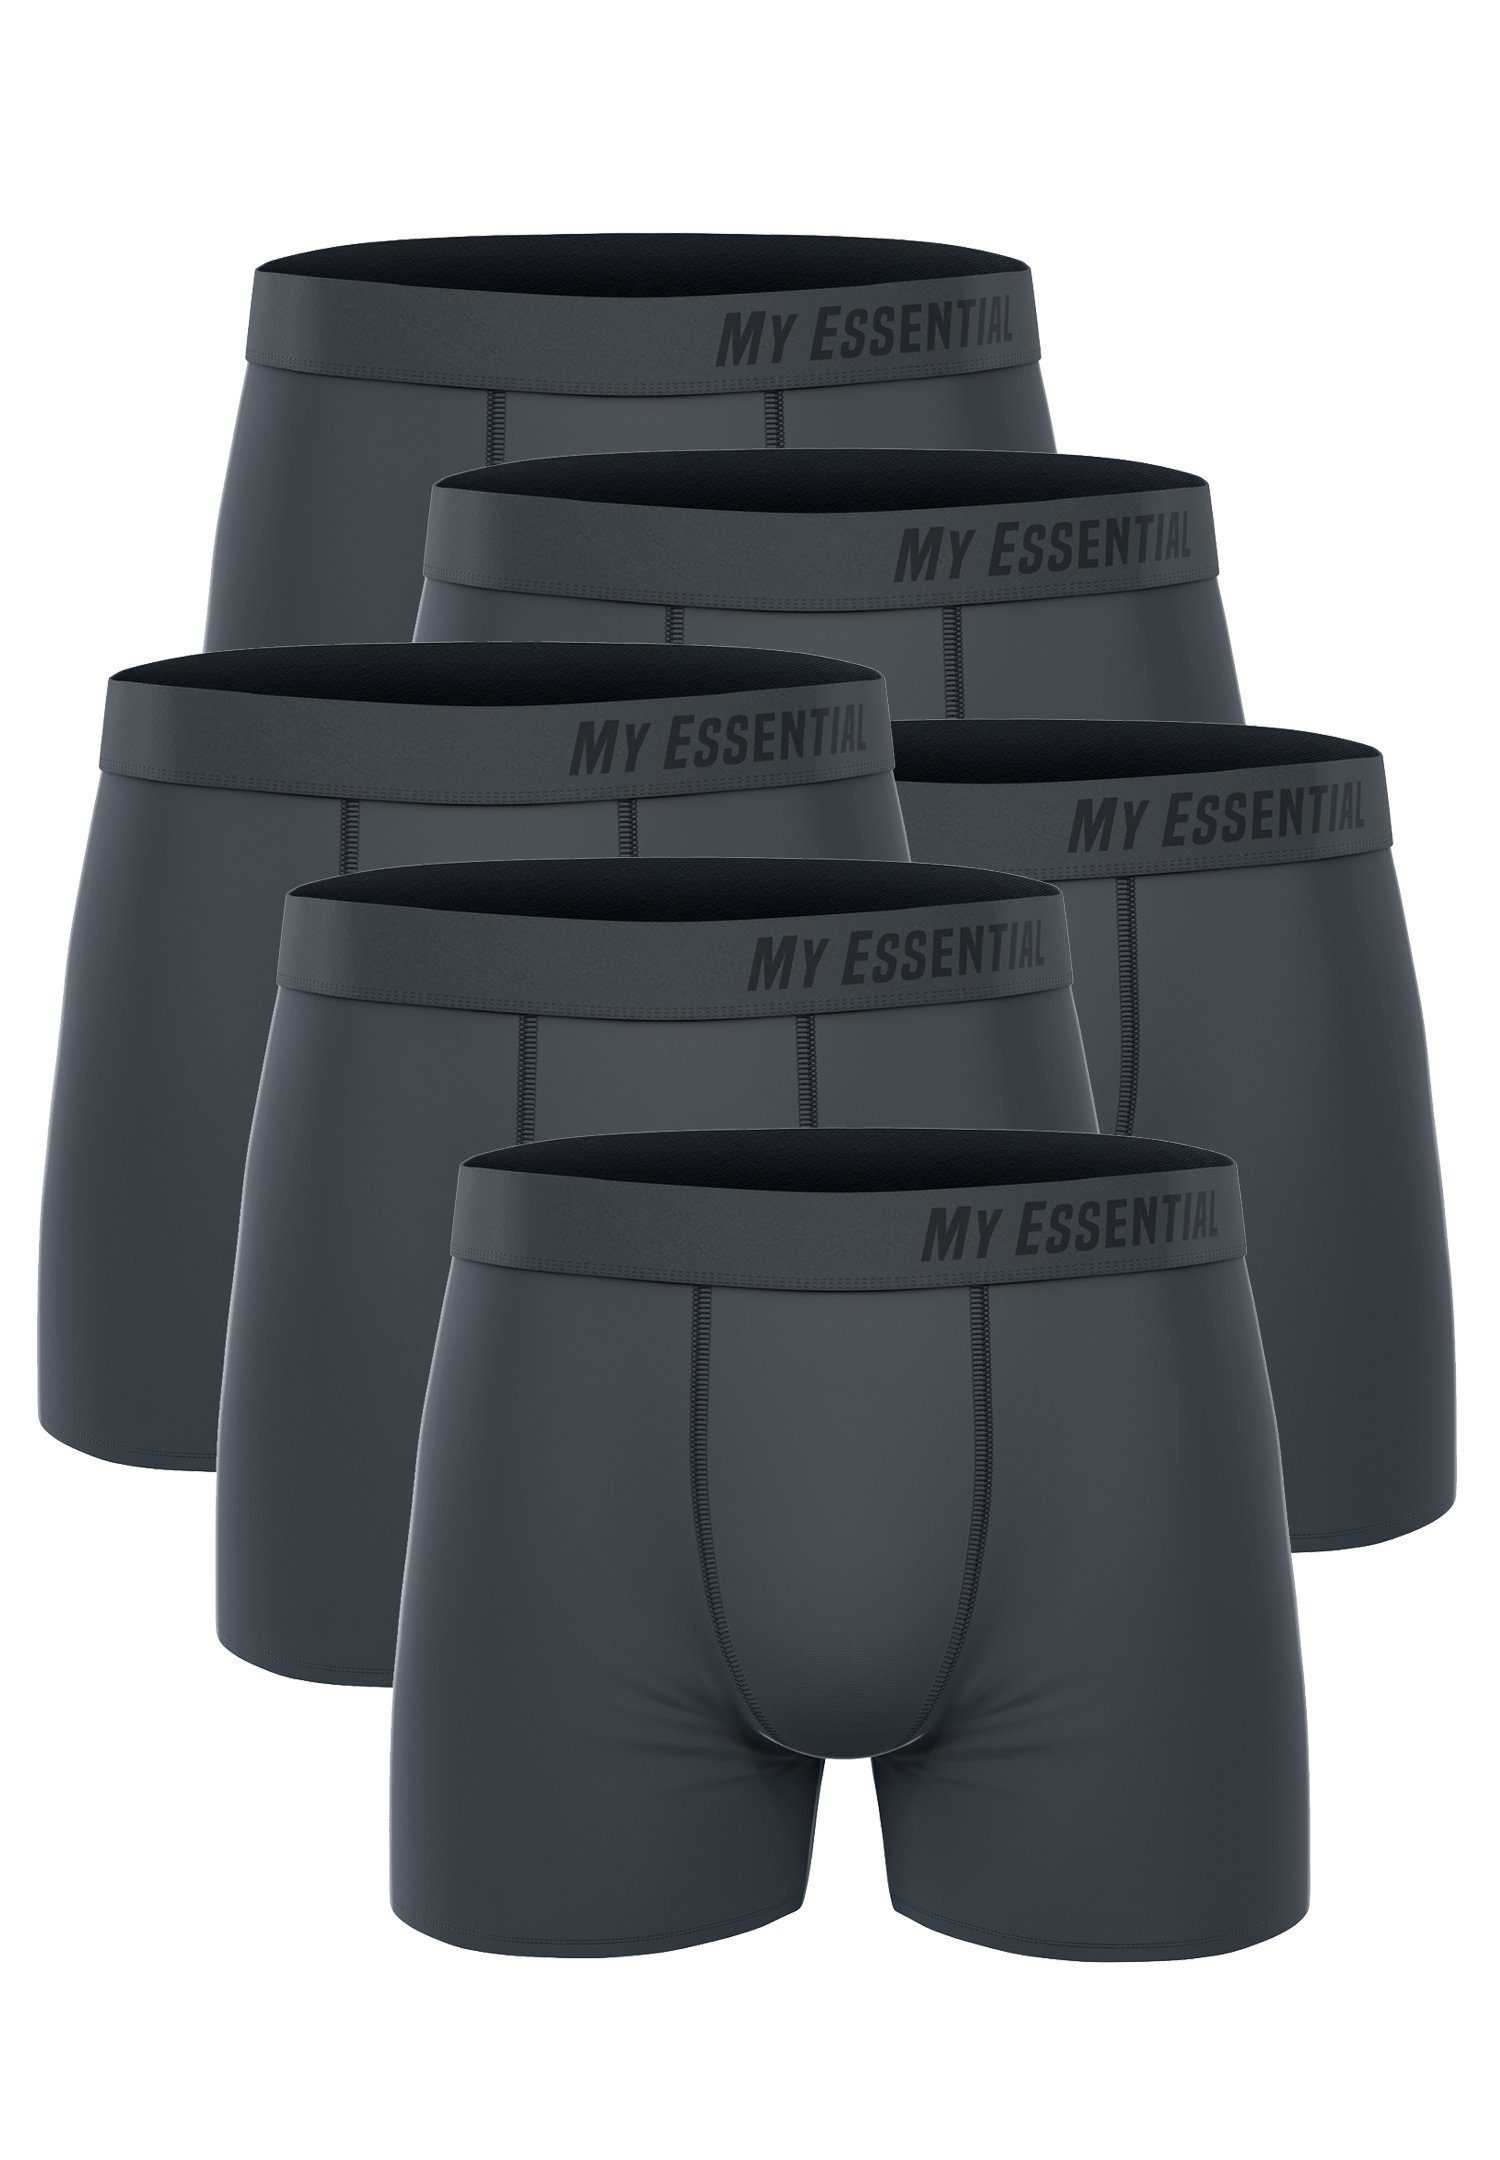 My Essential Clothing Boxershorts My Essential 6 Pack Boxers Cotton Bio (Spar-Pack, 6-St., 6er-Pack) Grey